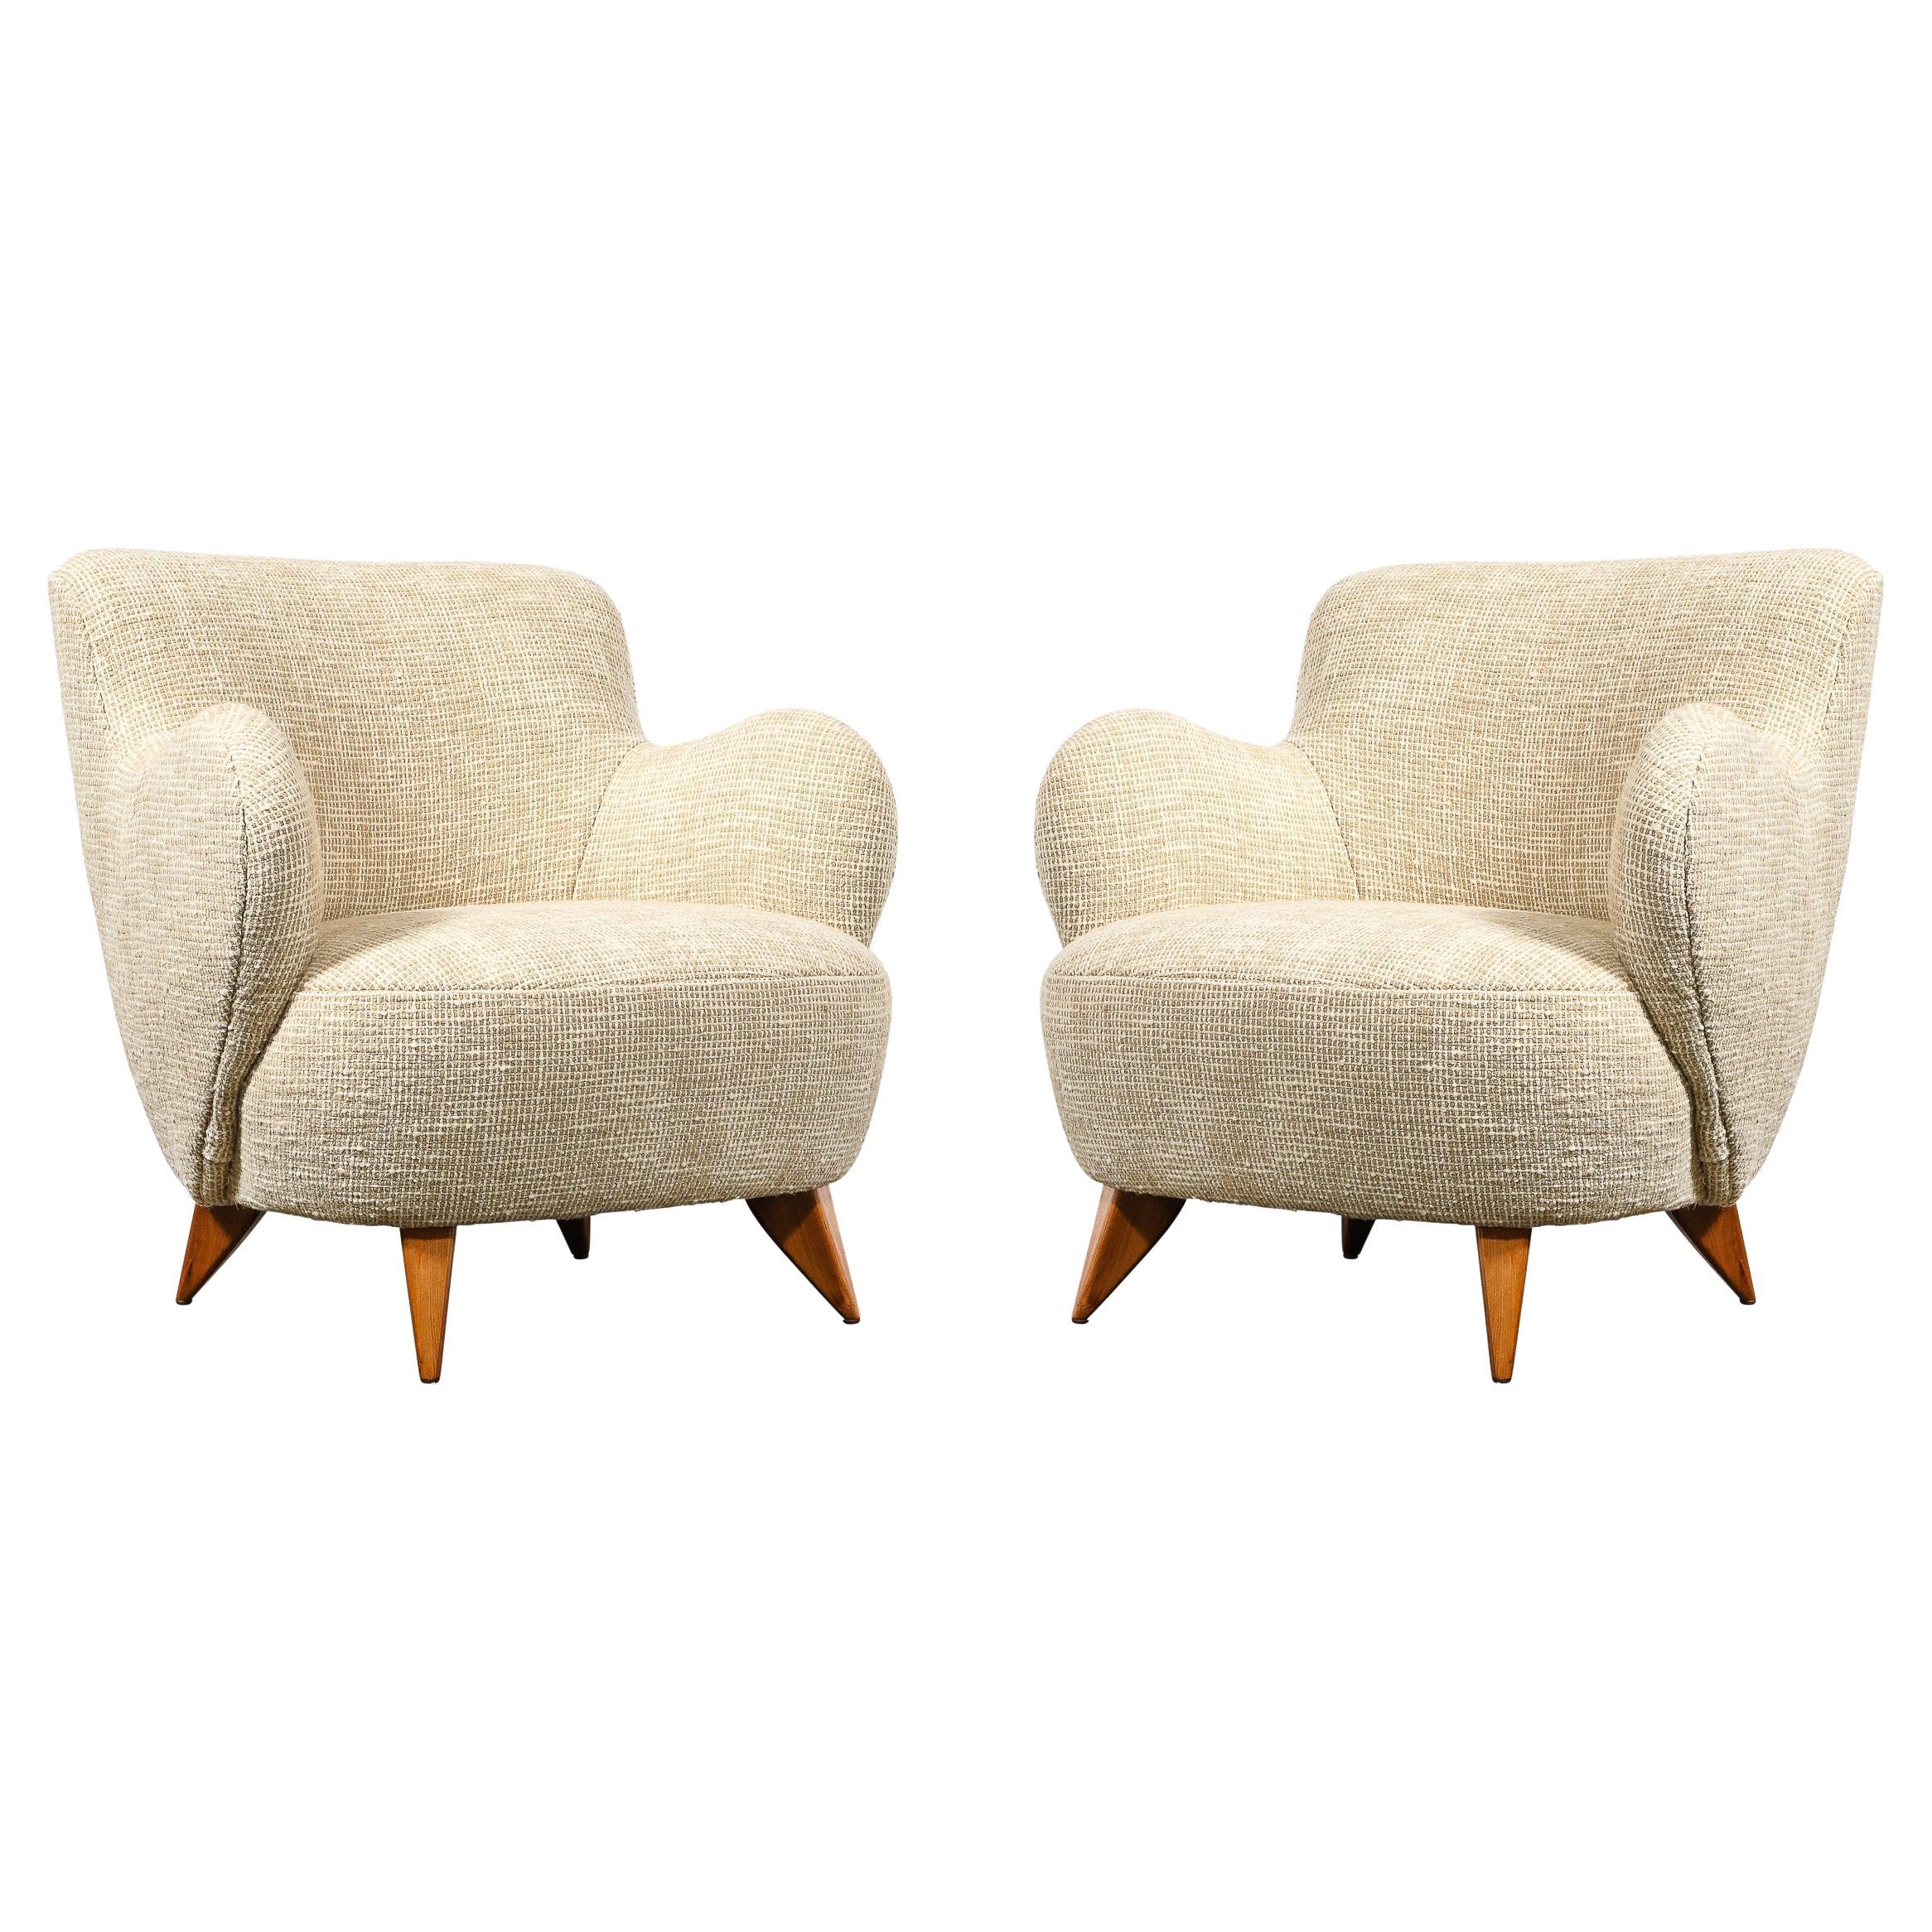 Pair of Mid Century Documented Walnut "Barrel" Chairs by Vladimir Kagan, 1947 For Sale